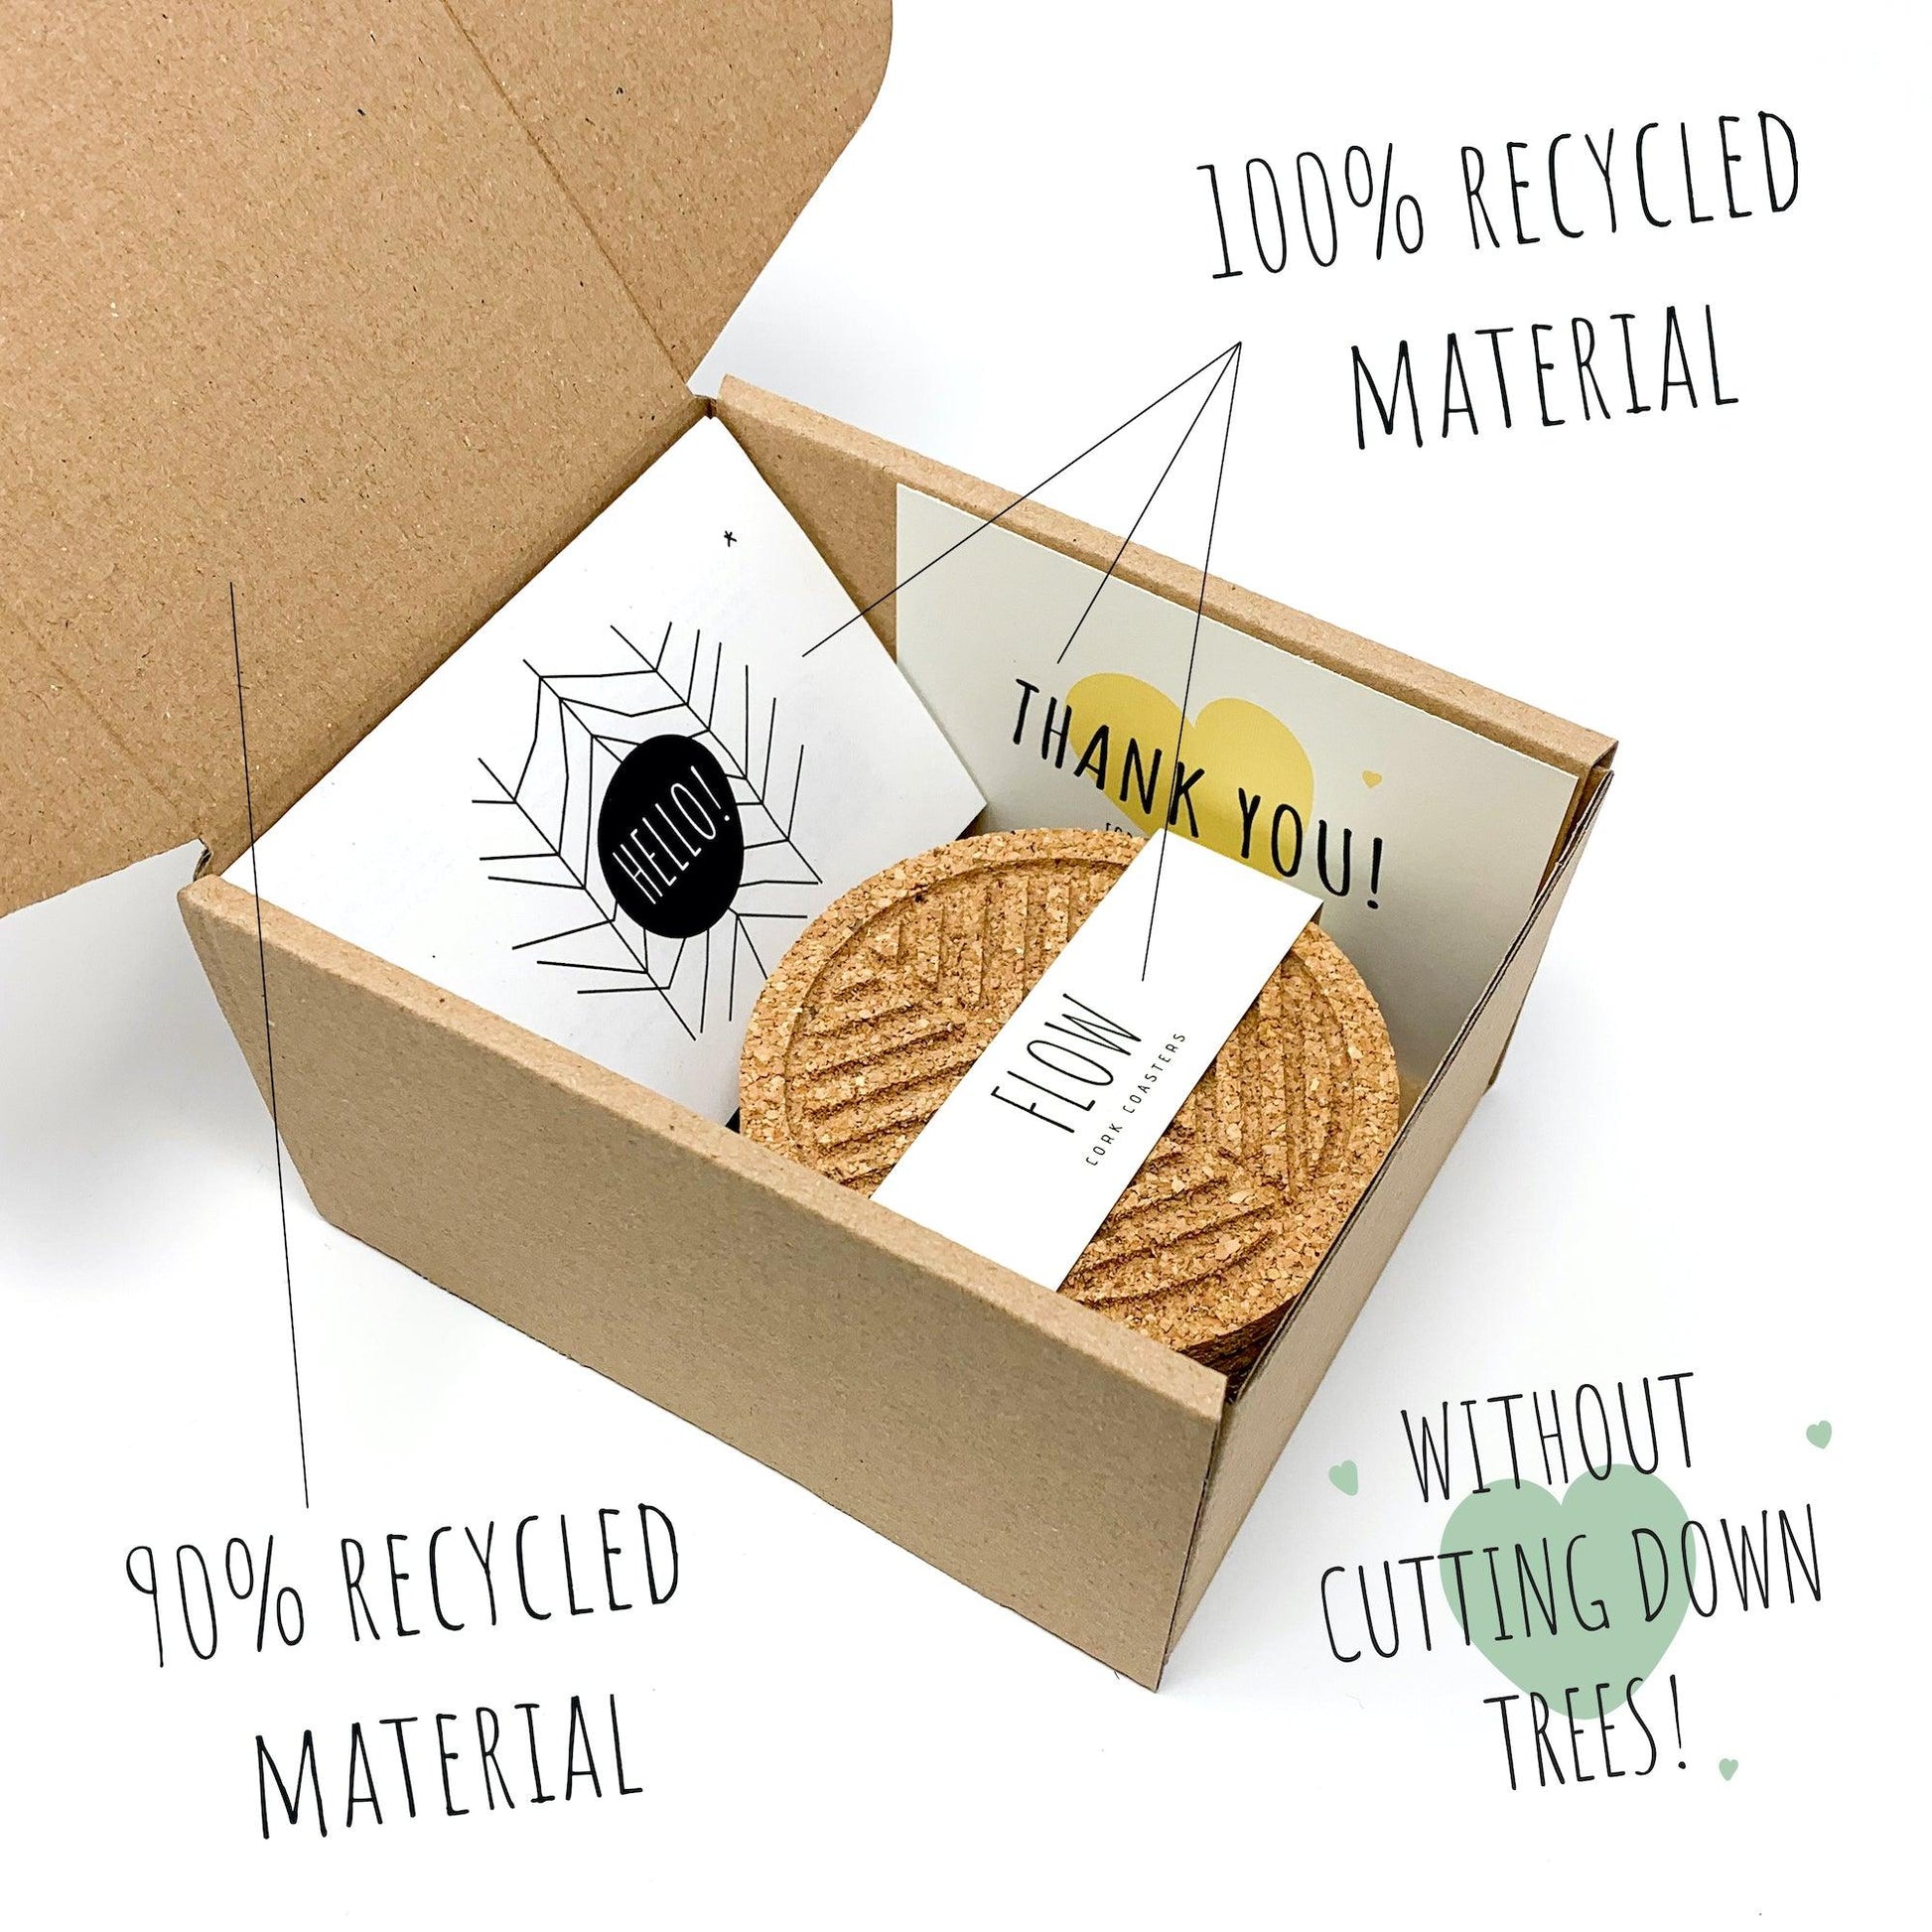 Flow Cork Coaster Set with nature motives- 100% recycled papers, 90% recycled paper Box, renewable cork product without cutting down trees.